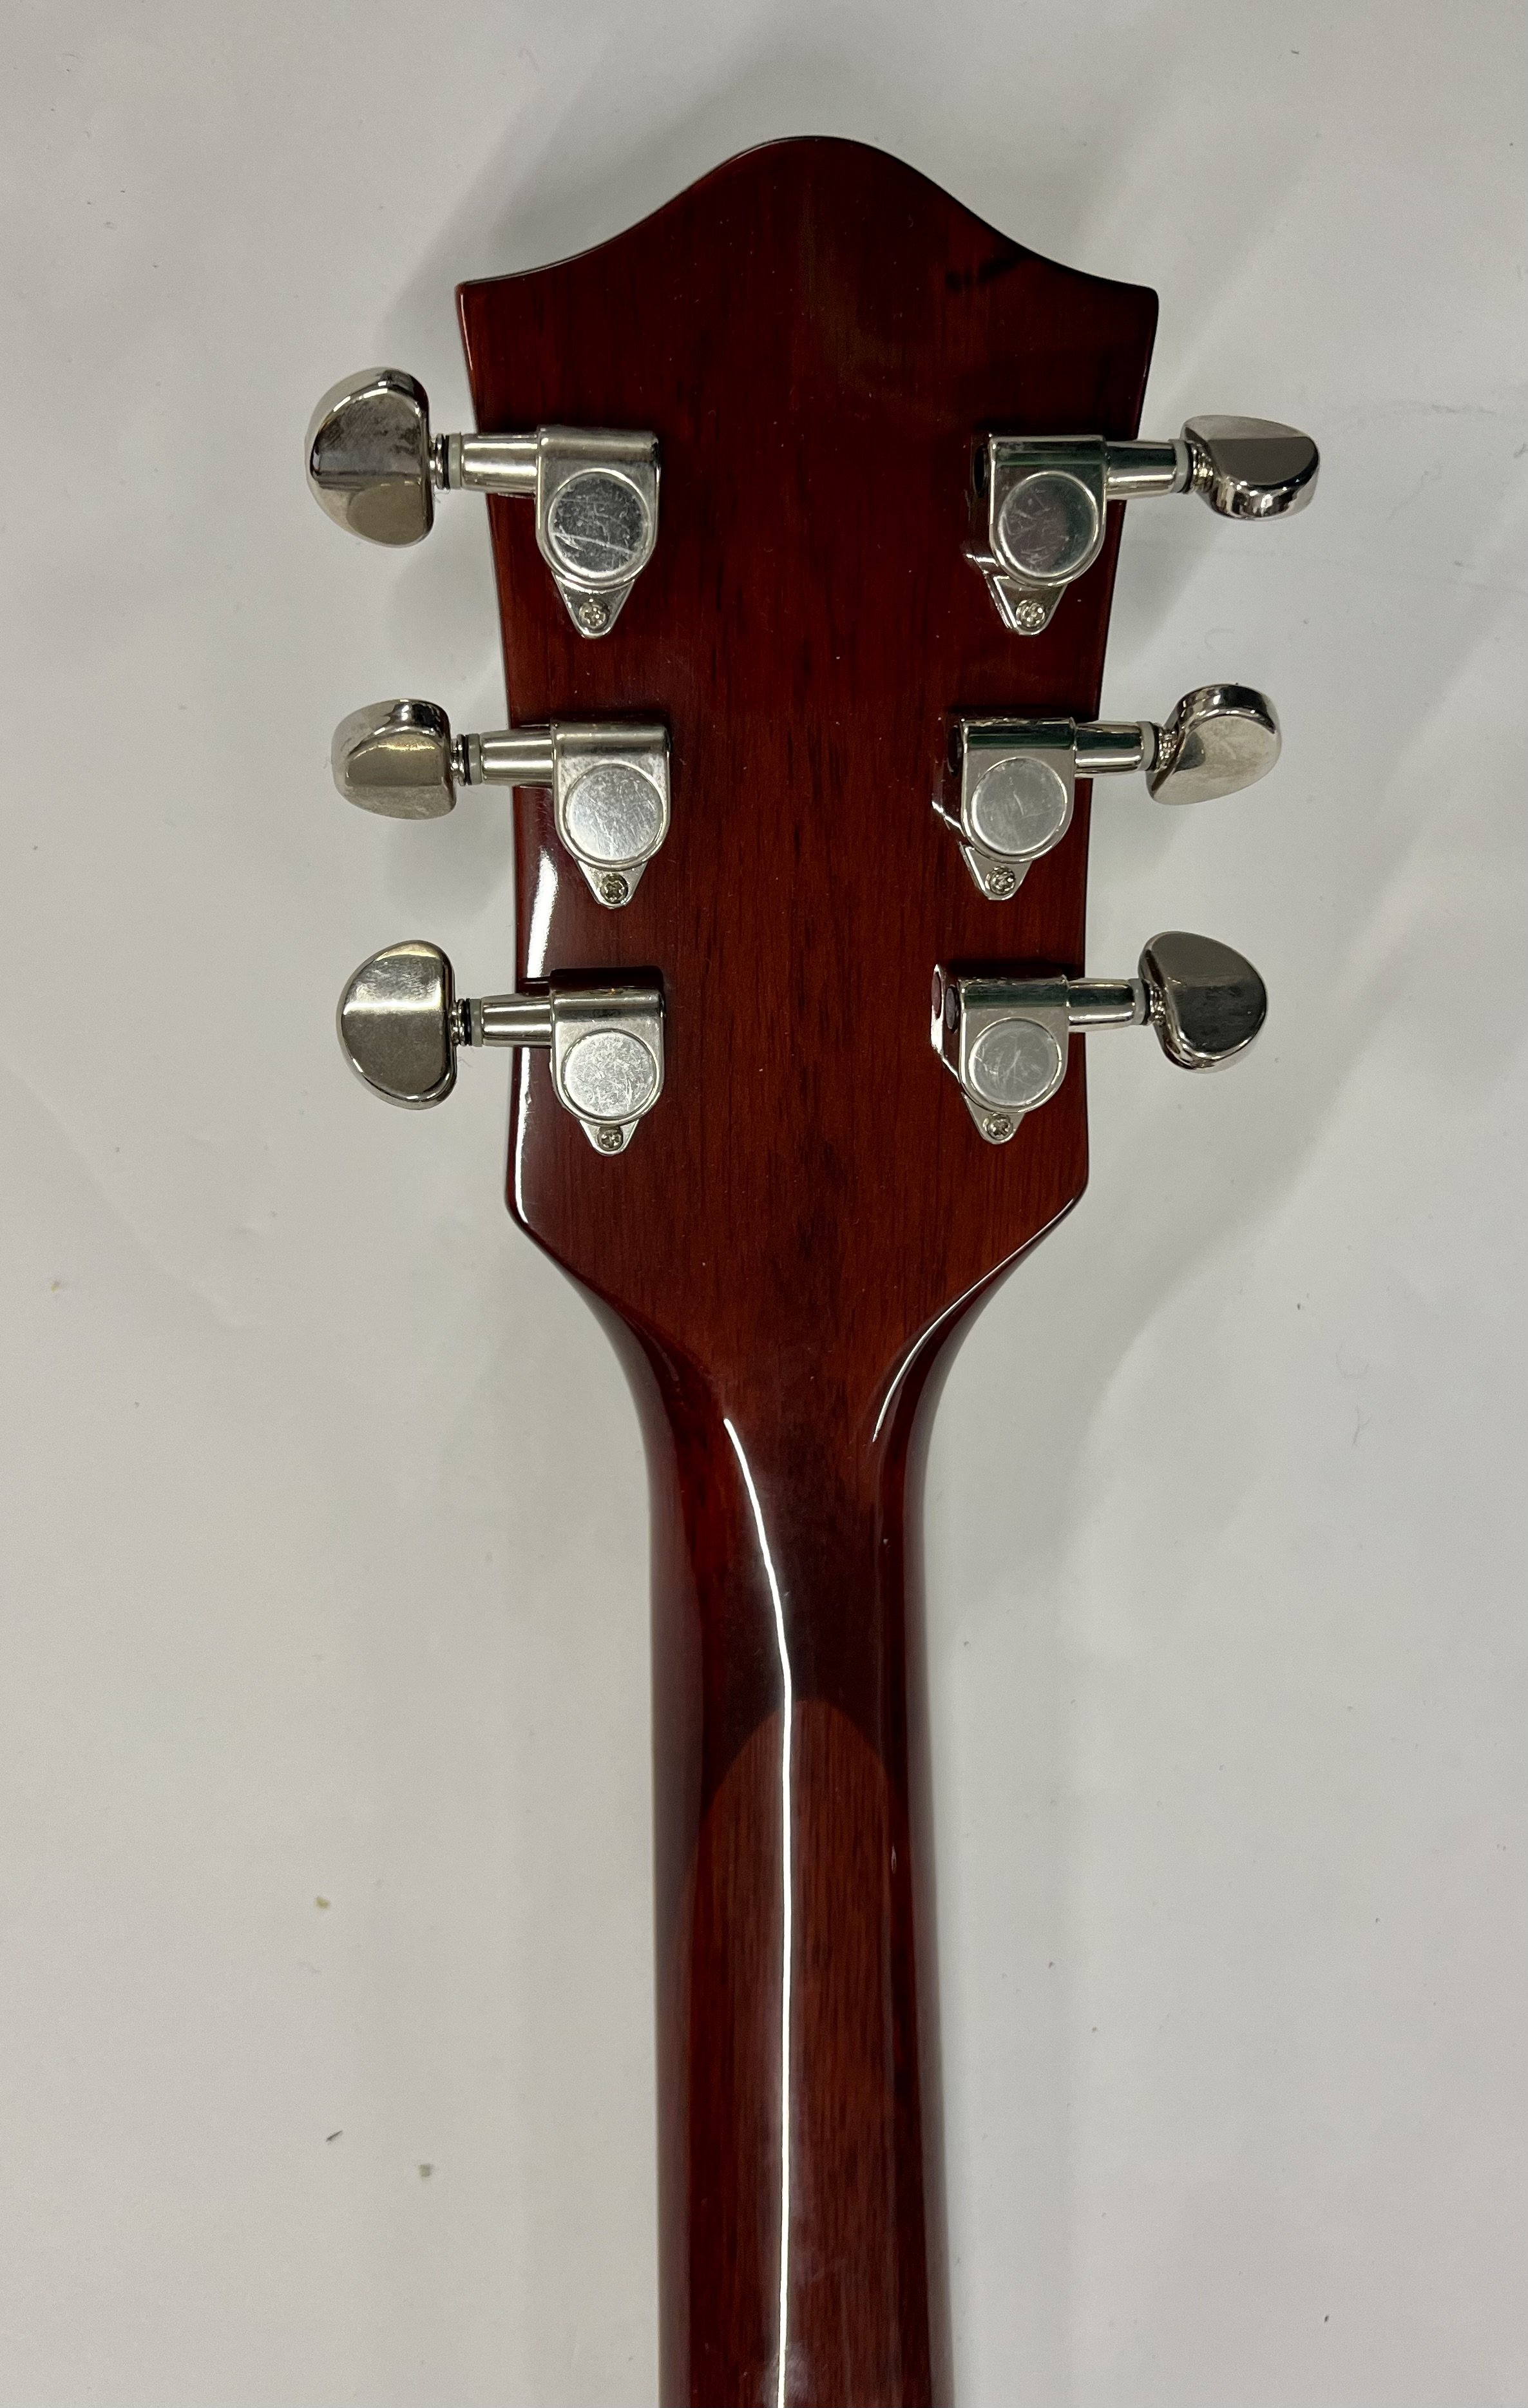 An very good + condition Gretsch Streamliner G2622 - Image 4 of 5